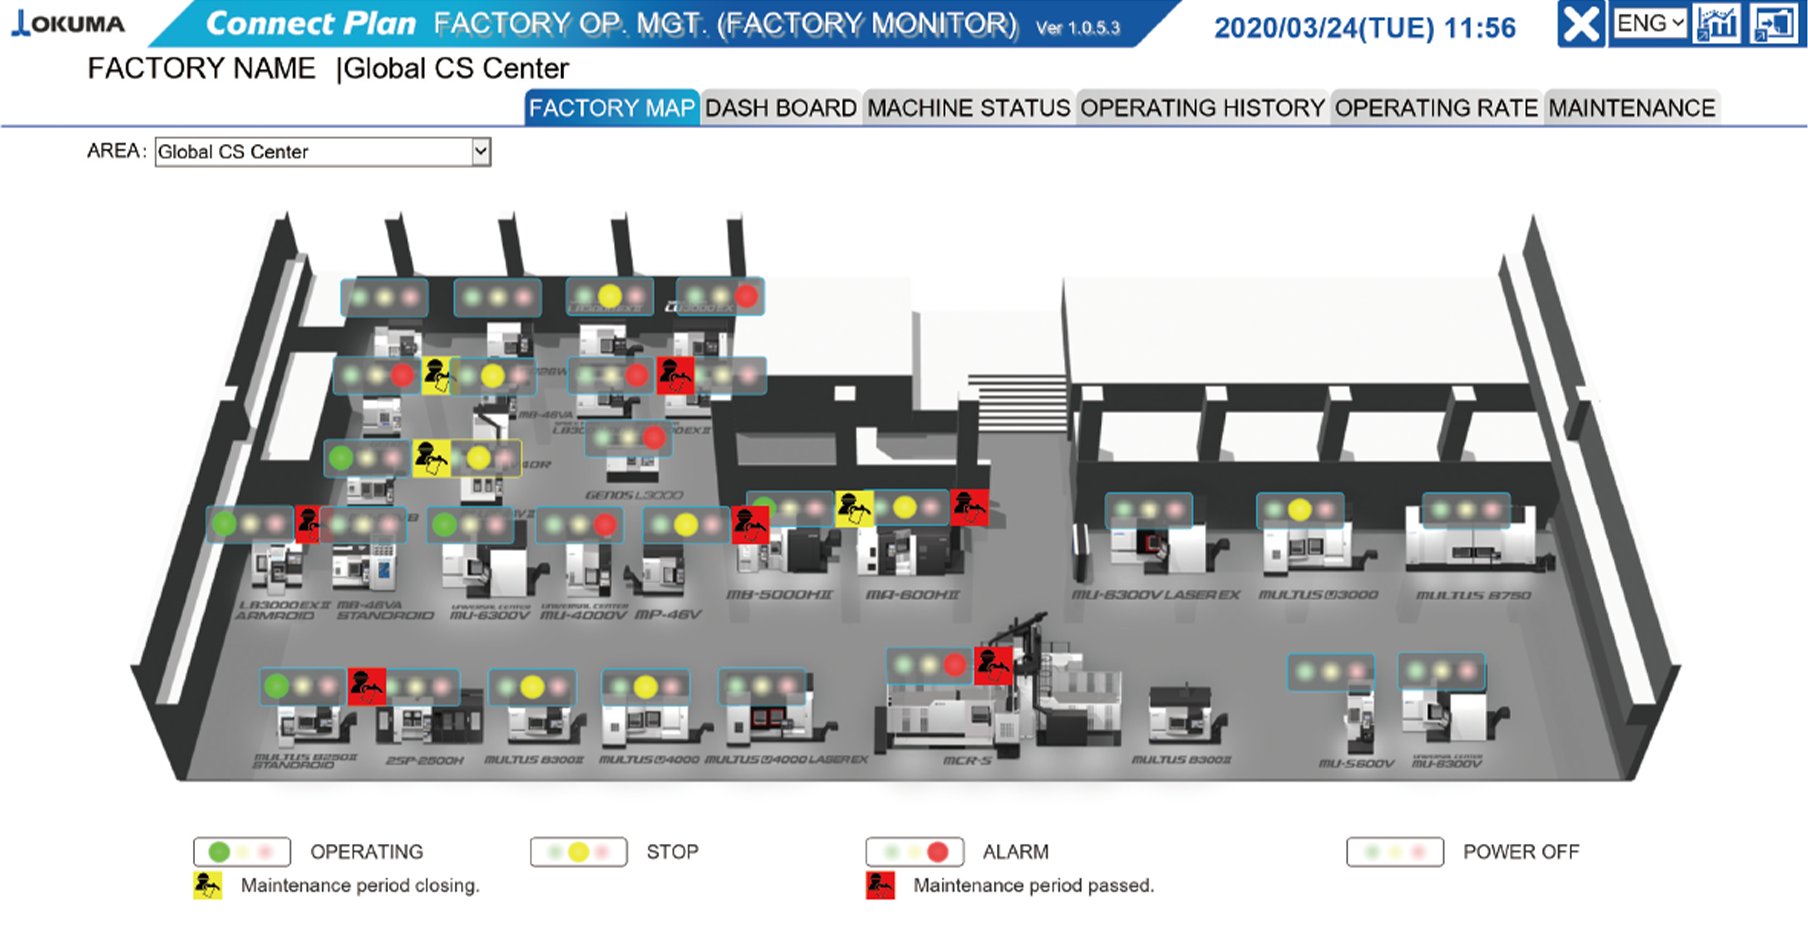 Factory Monitor suite